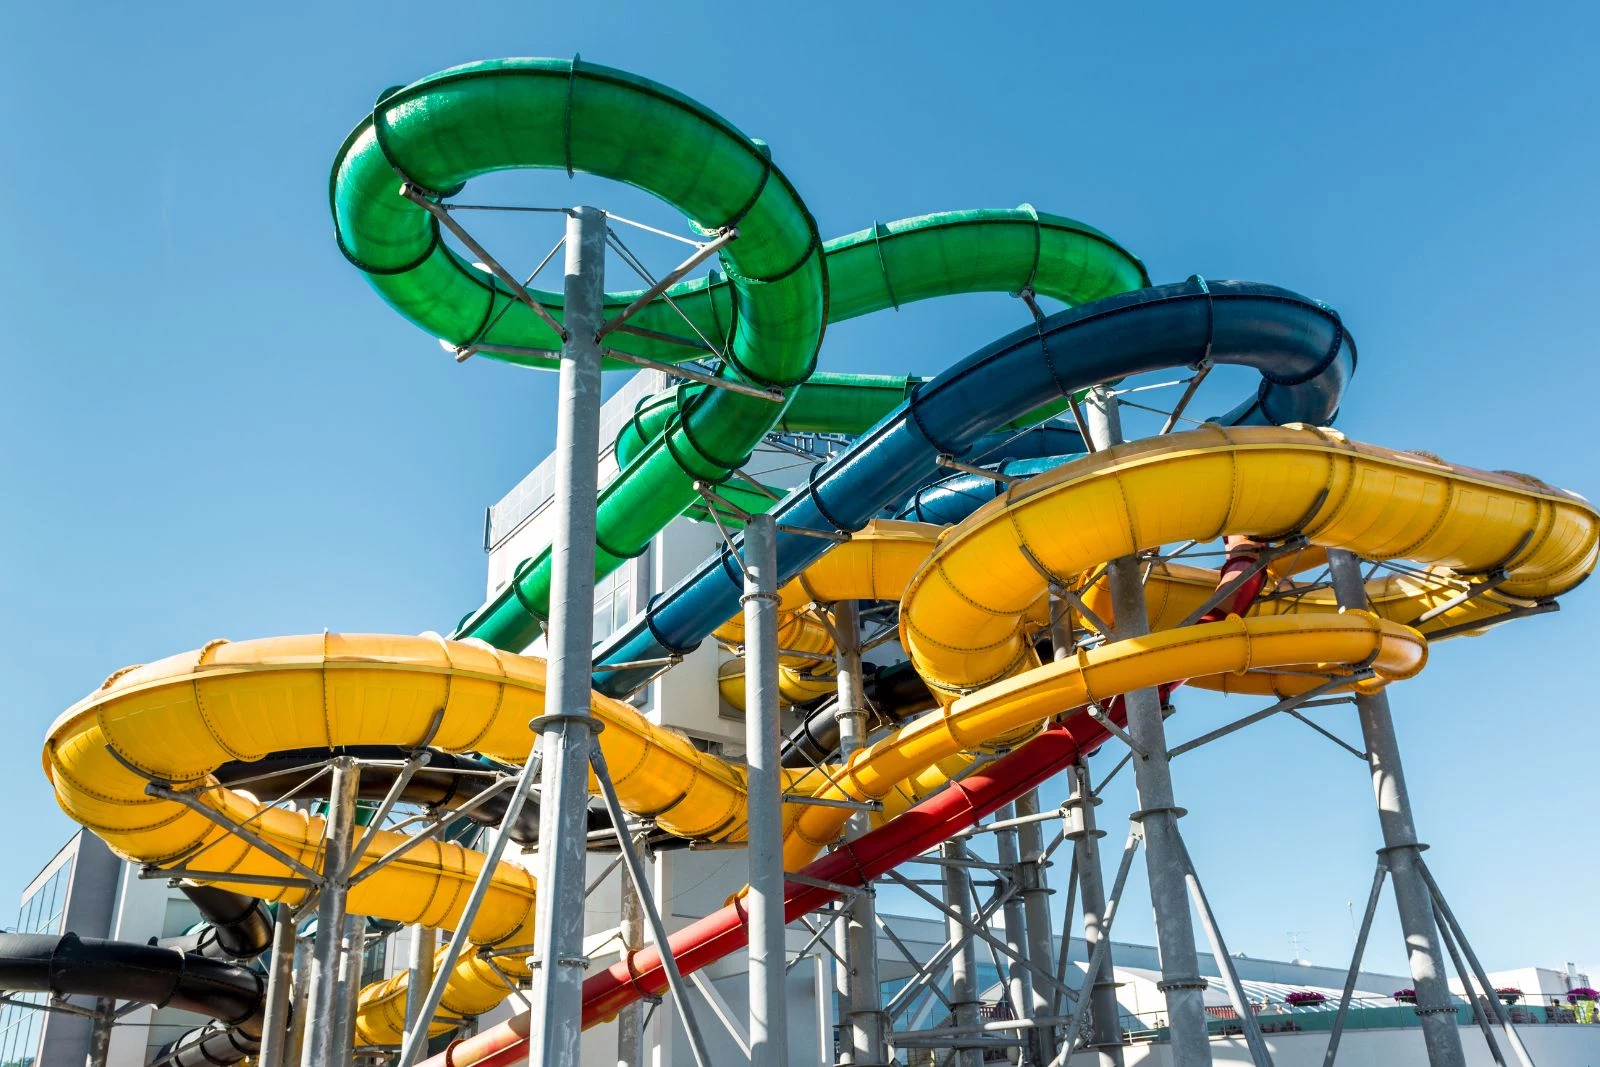 Upstate New York Water Park Iconic Slides for Sale on Facebook